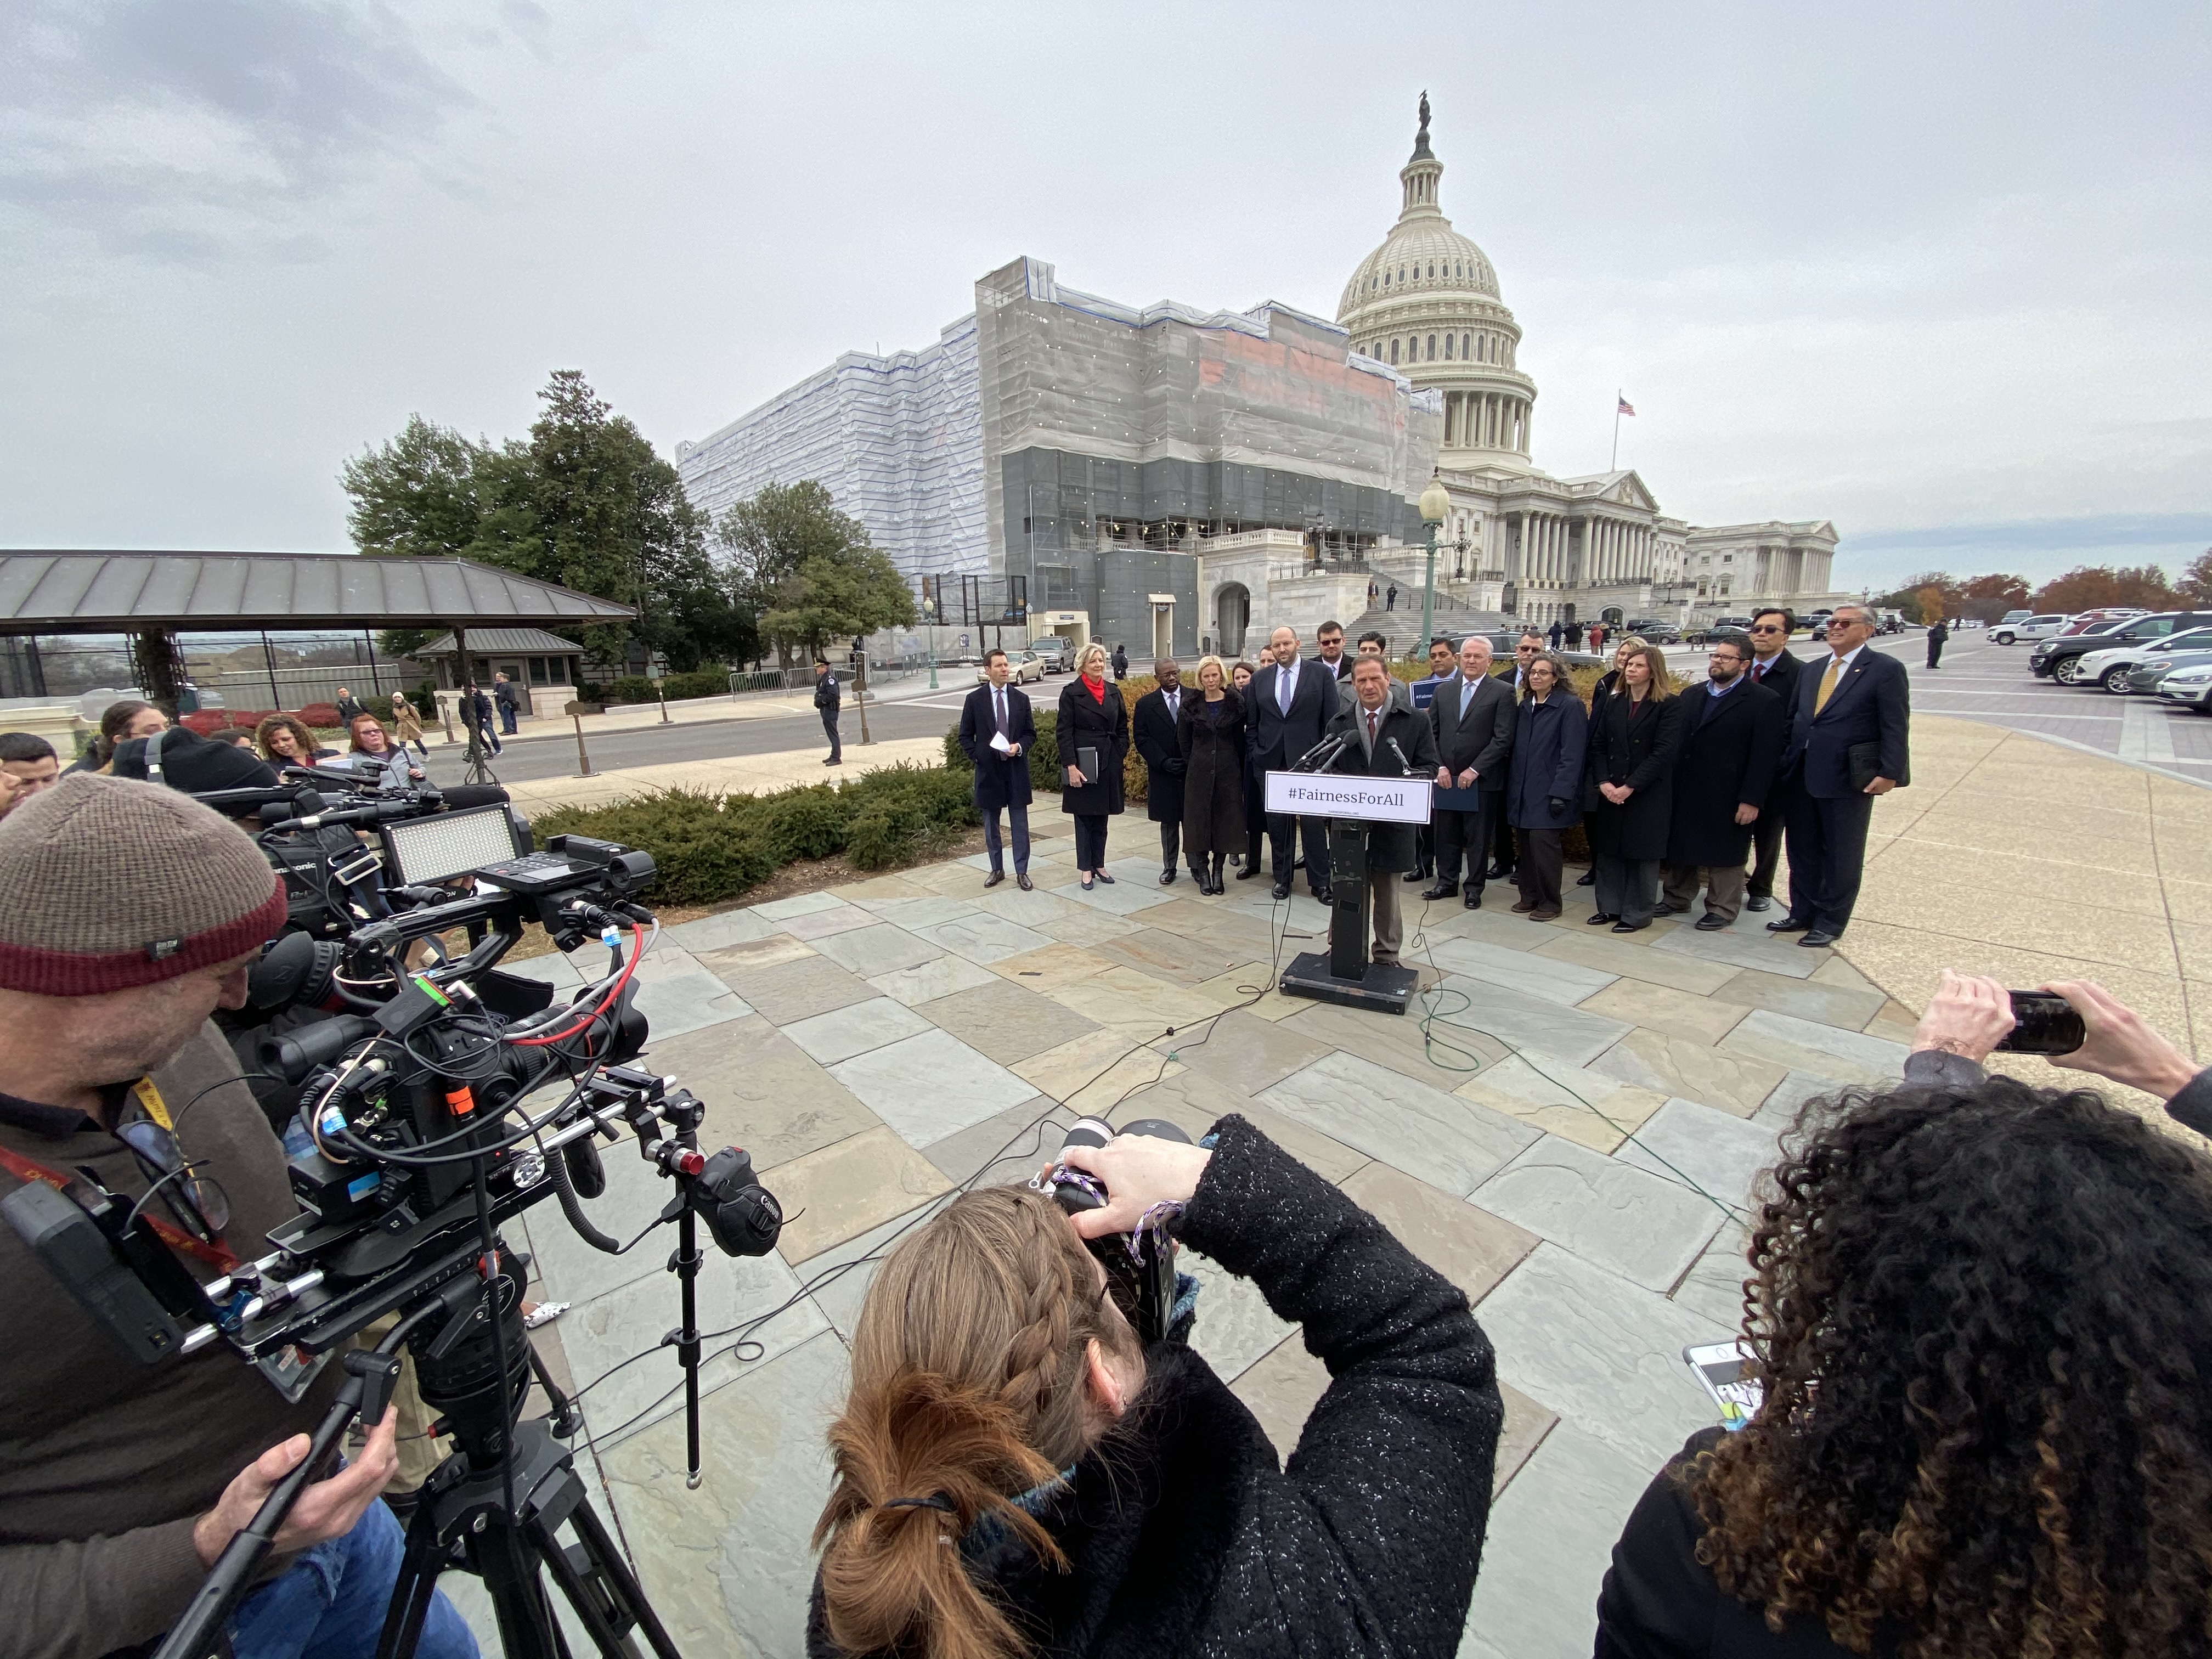 Fairness for All Act is launched in Washington, D.C., on Dec. 6, 2019. Photo by Dan Weber